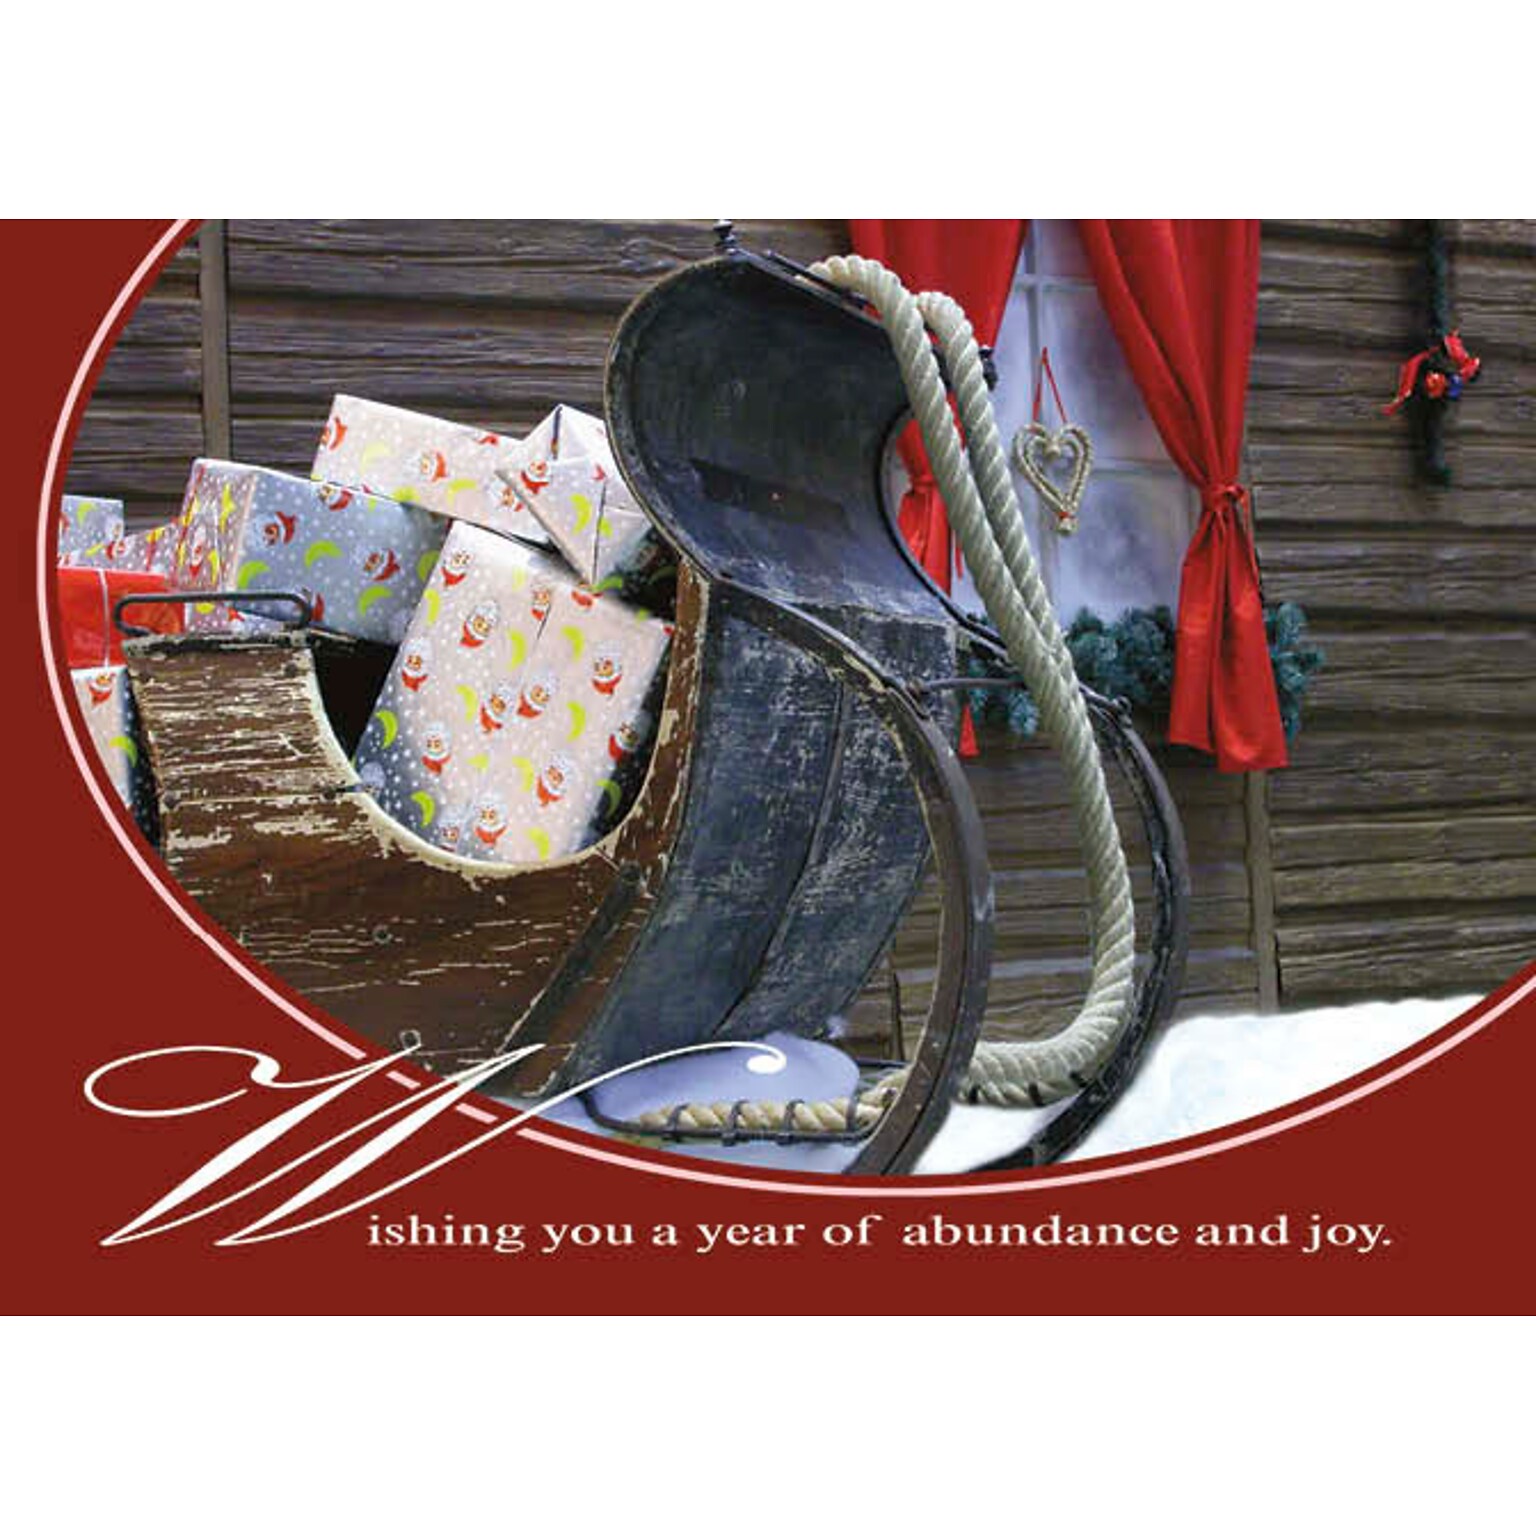 Wishing You A Year Of Abundance And Joy Holiday Greeting Cards, With A7 Envelopes, 7 x 5, 25 Cards per Set